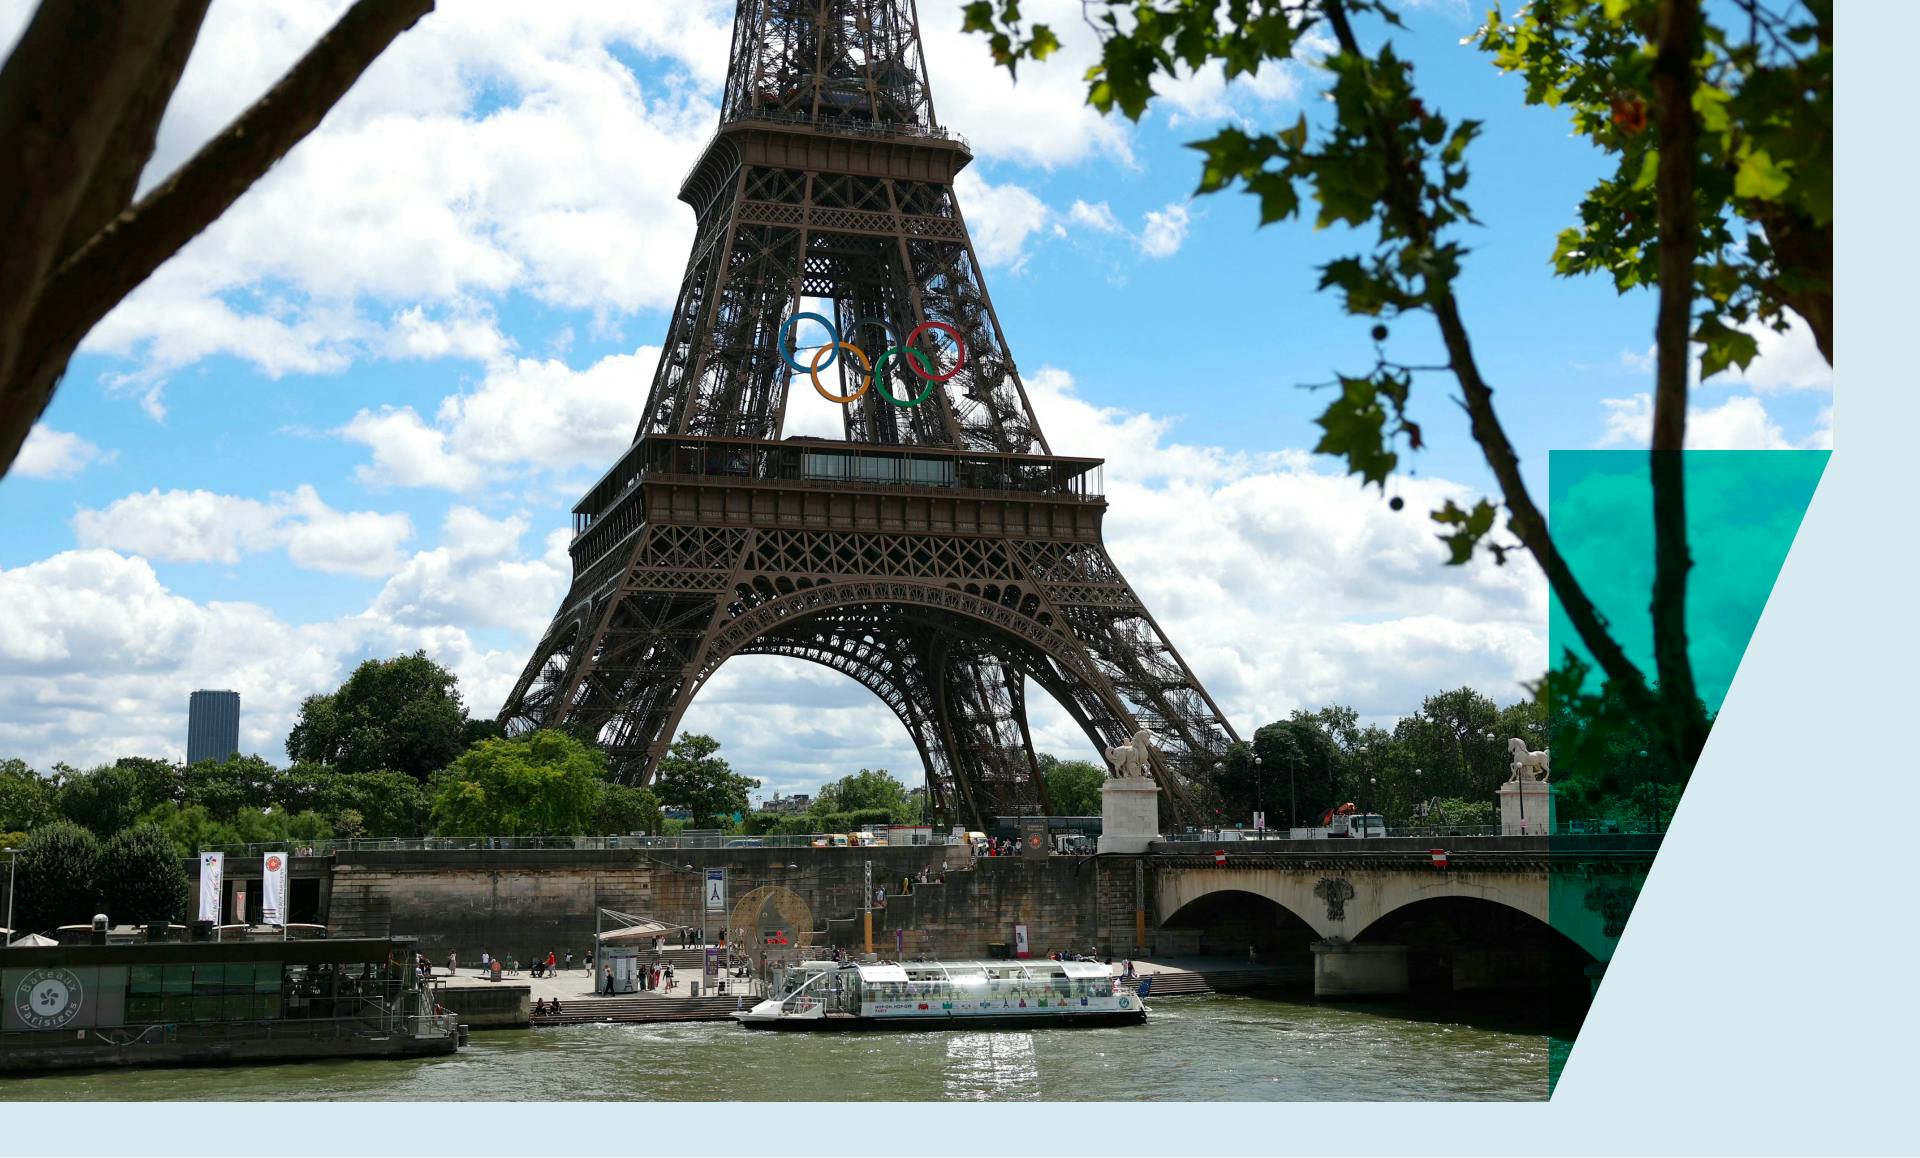 A Seine river bus boat docks in front the Eiffel Tower adorned with Olympic rings ahead of the Paris 2024 Olympic and Paralympic Games in Paris in July 16, 2024 